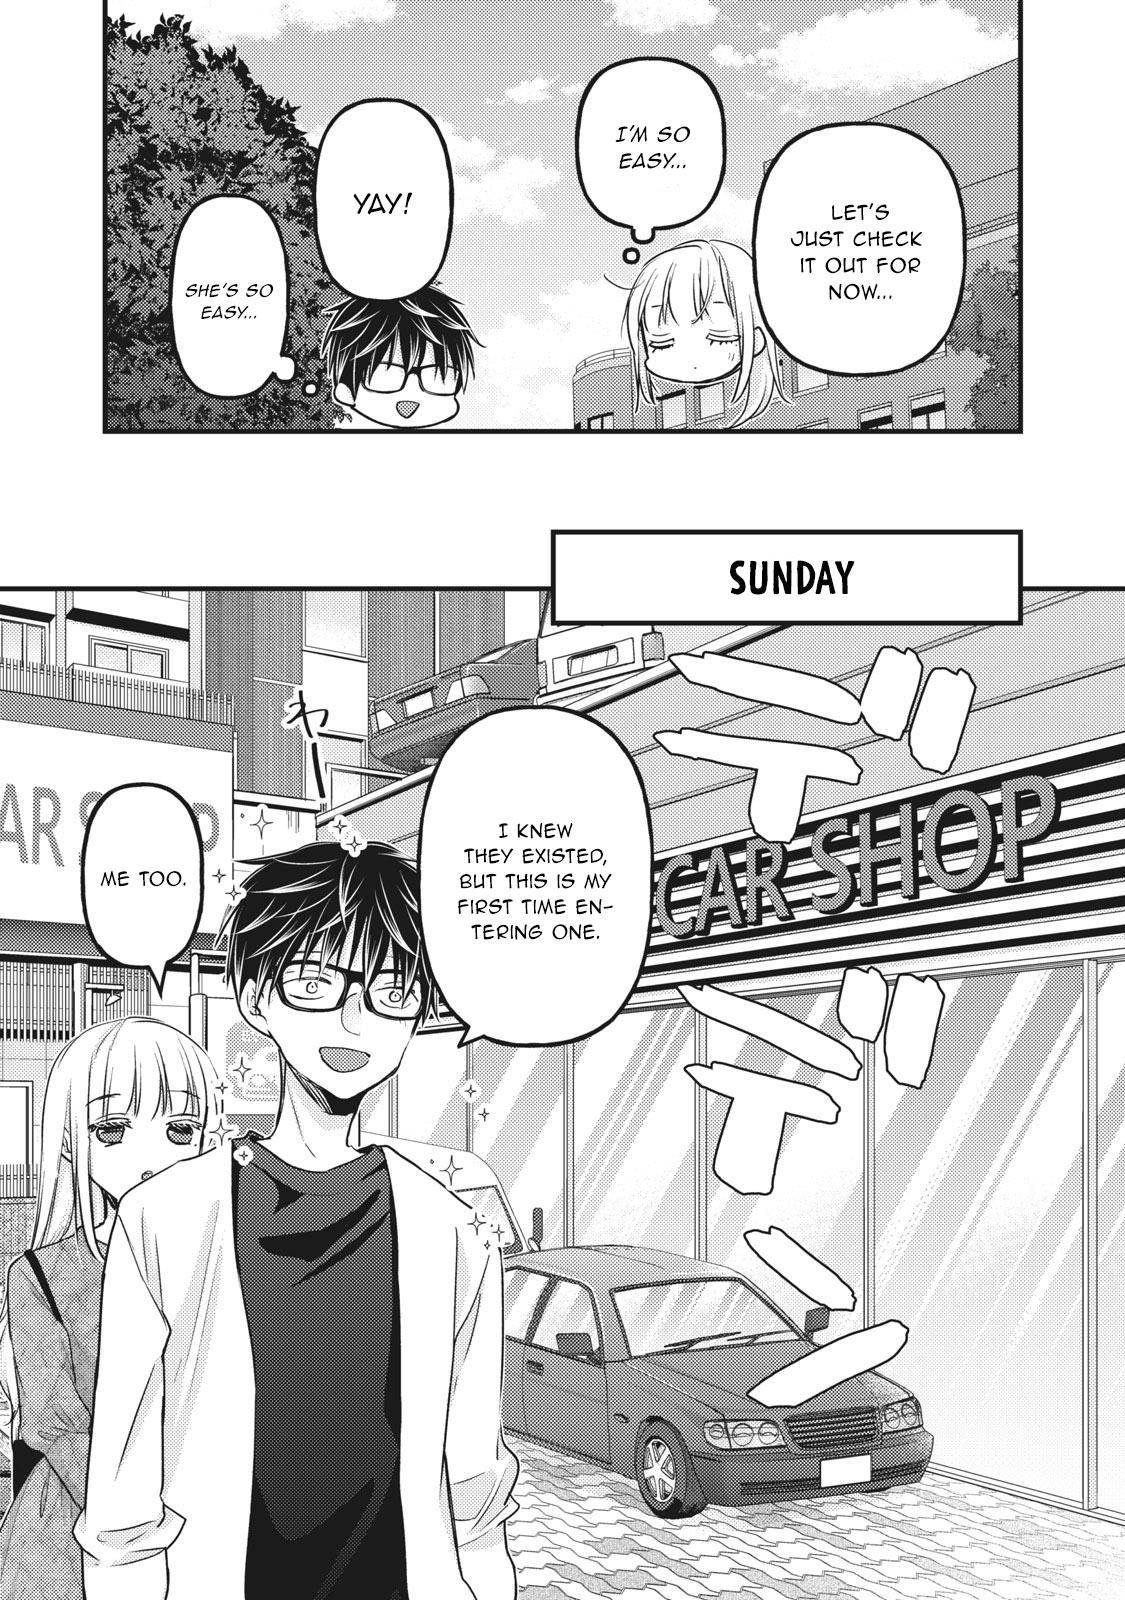 We May Be an Inexperienced Couple but... chapter 89 page 6